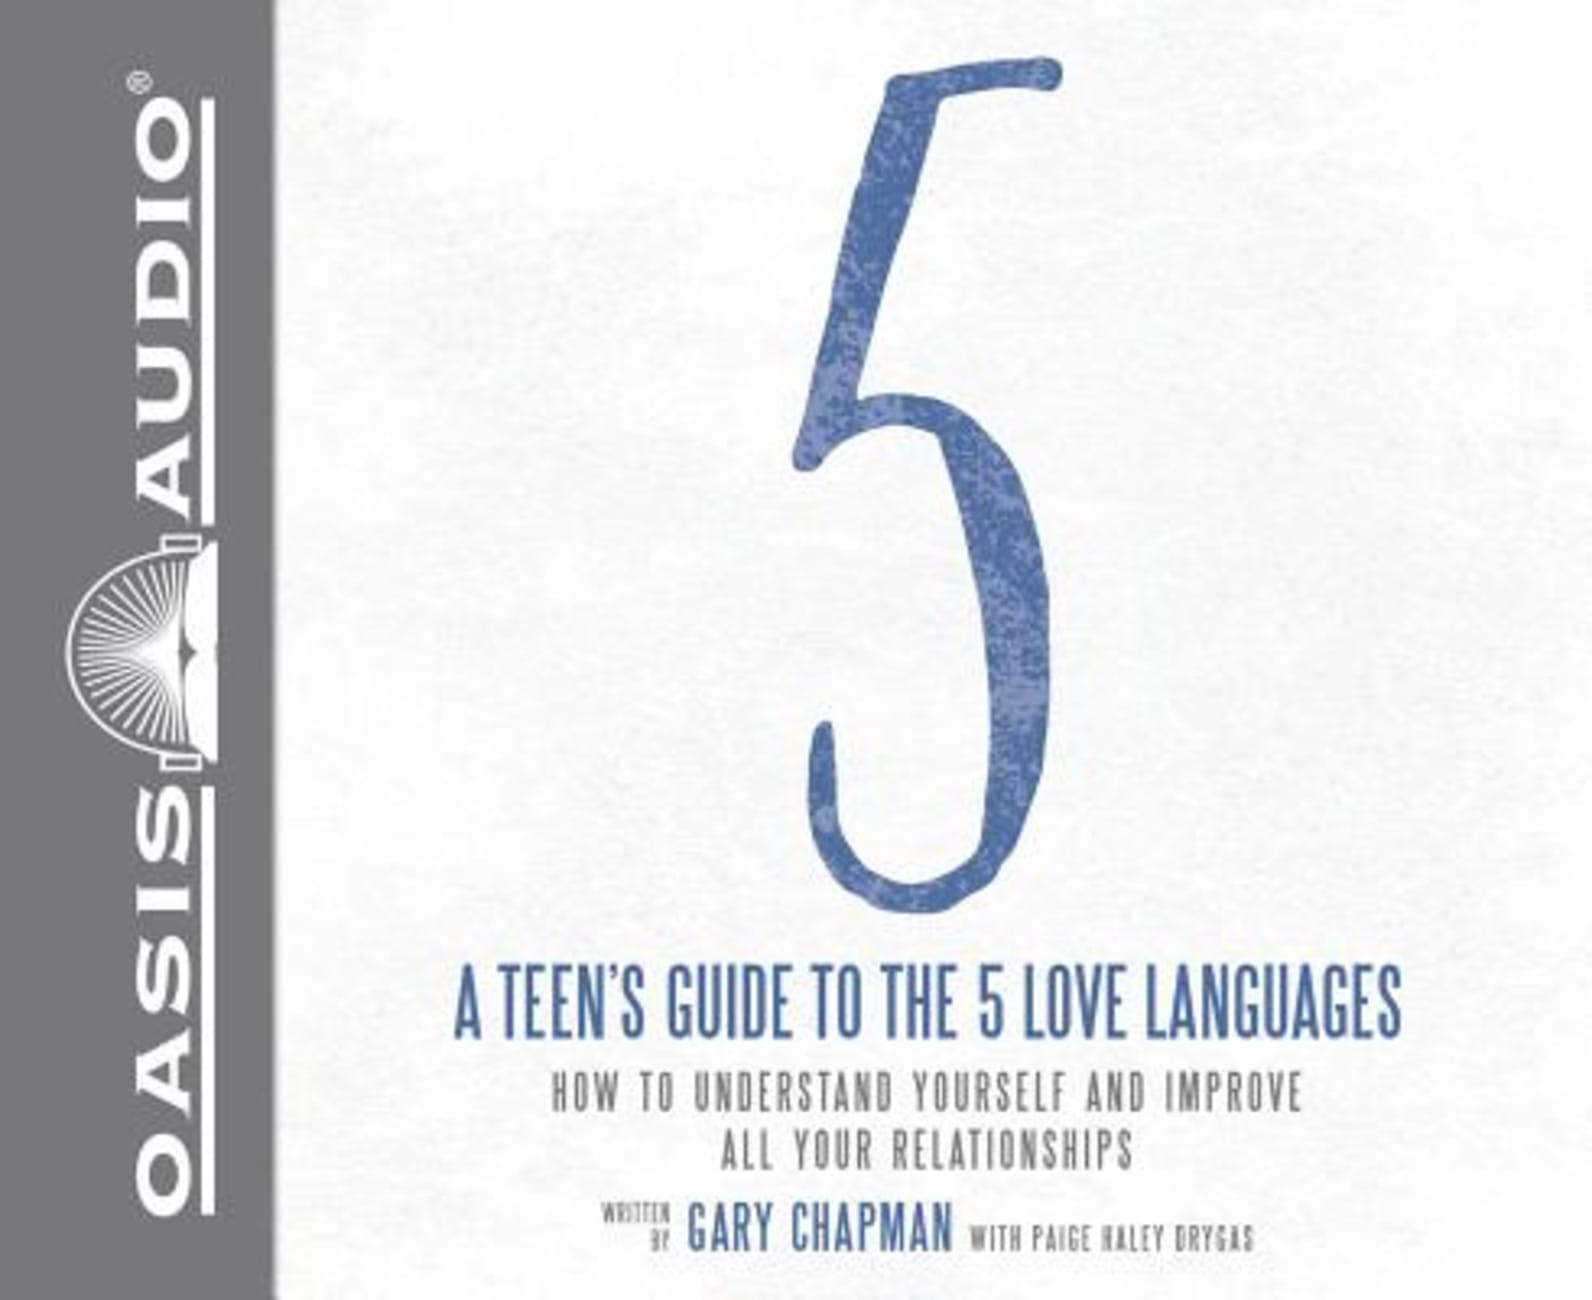 Teen's Guide to the 5 Love Languages (Unabridged, 3 Cds) Compact Disc